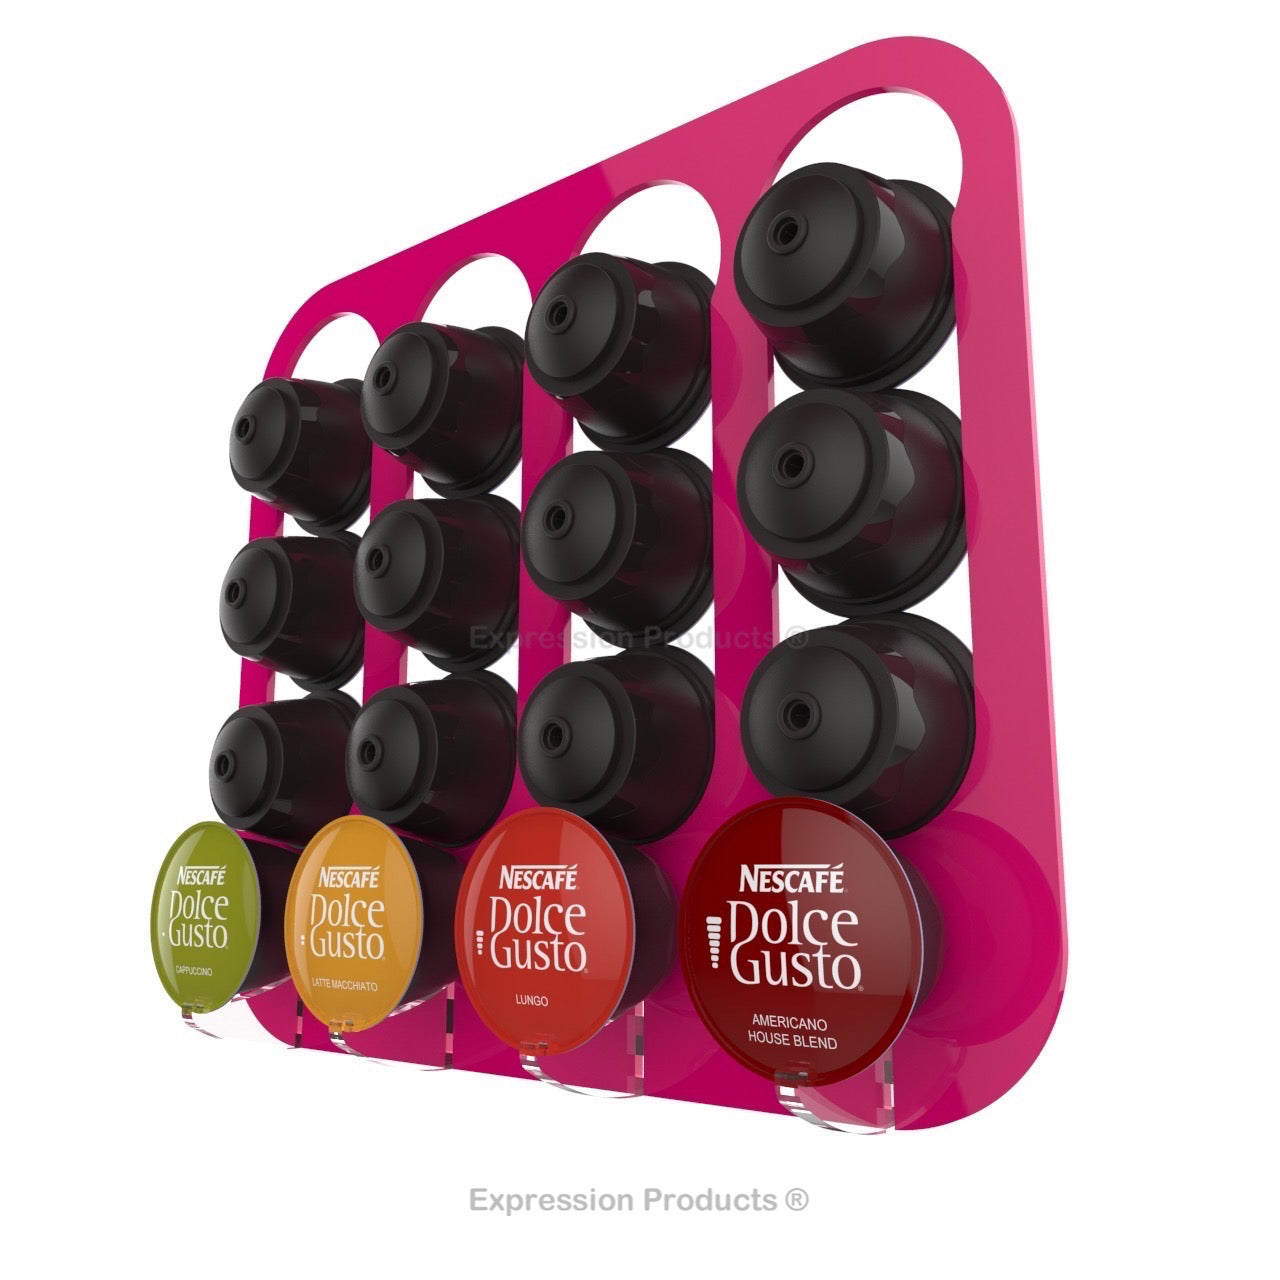 Dolce gusto coffee pod holder, wall mounted, half height.  Shown in pink holding 16 pods